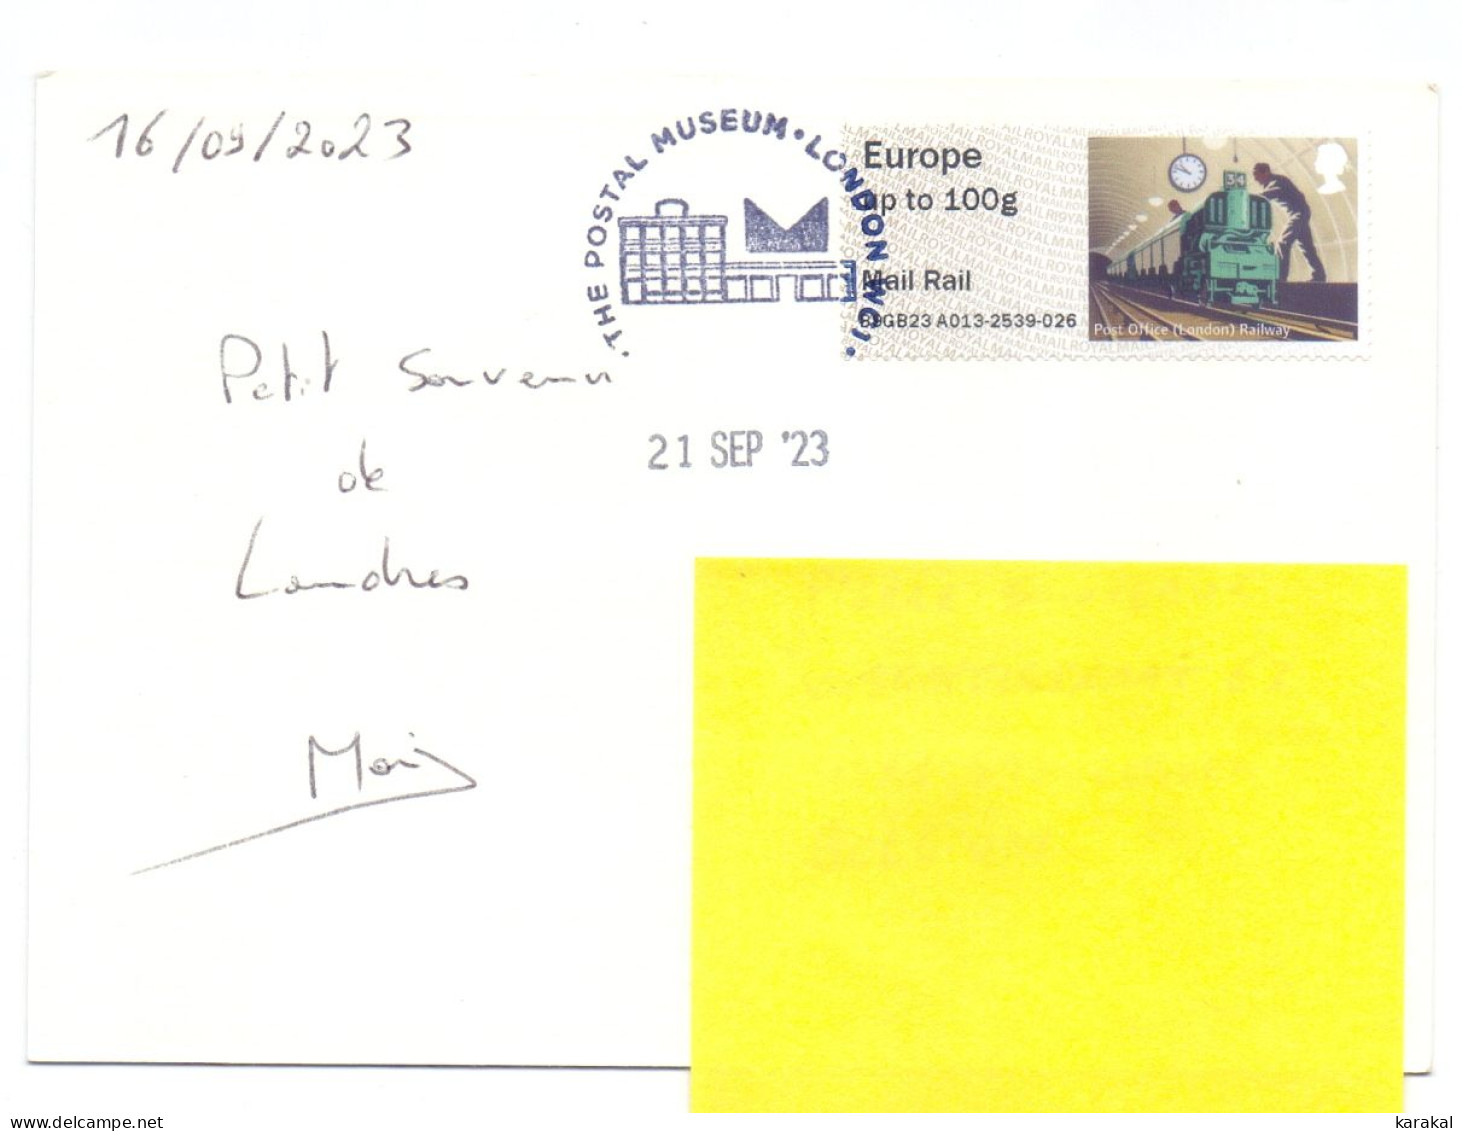 UK Post & Go ATM Mail Rail Train On Postcard From Postal Museum To Belgium - Post & Go (distributeurs)